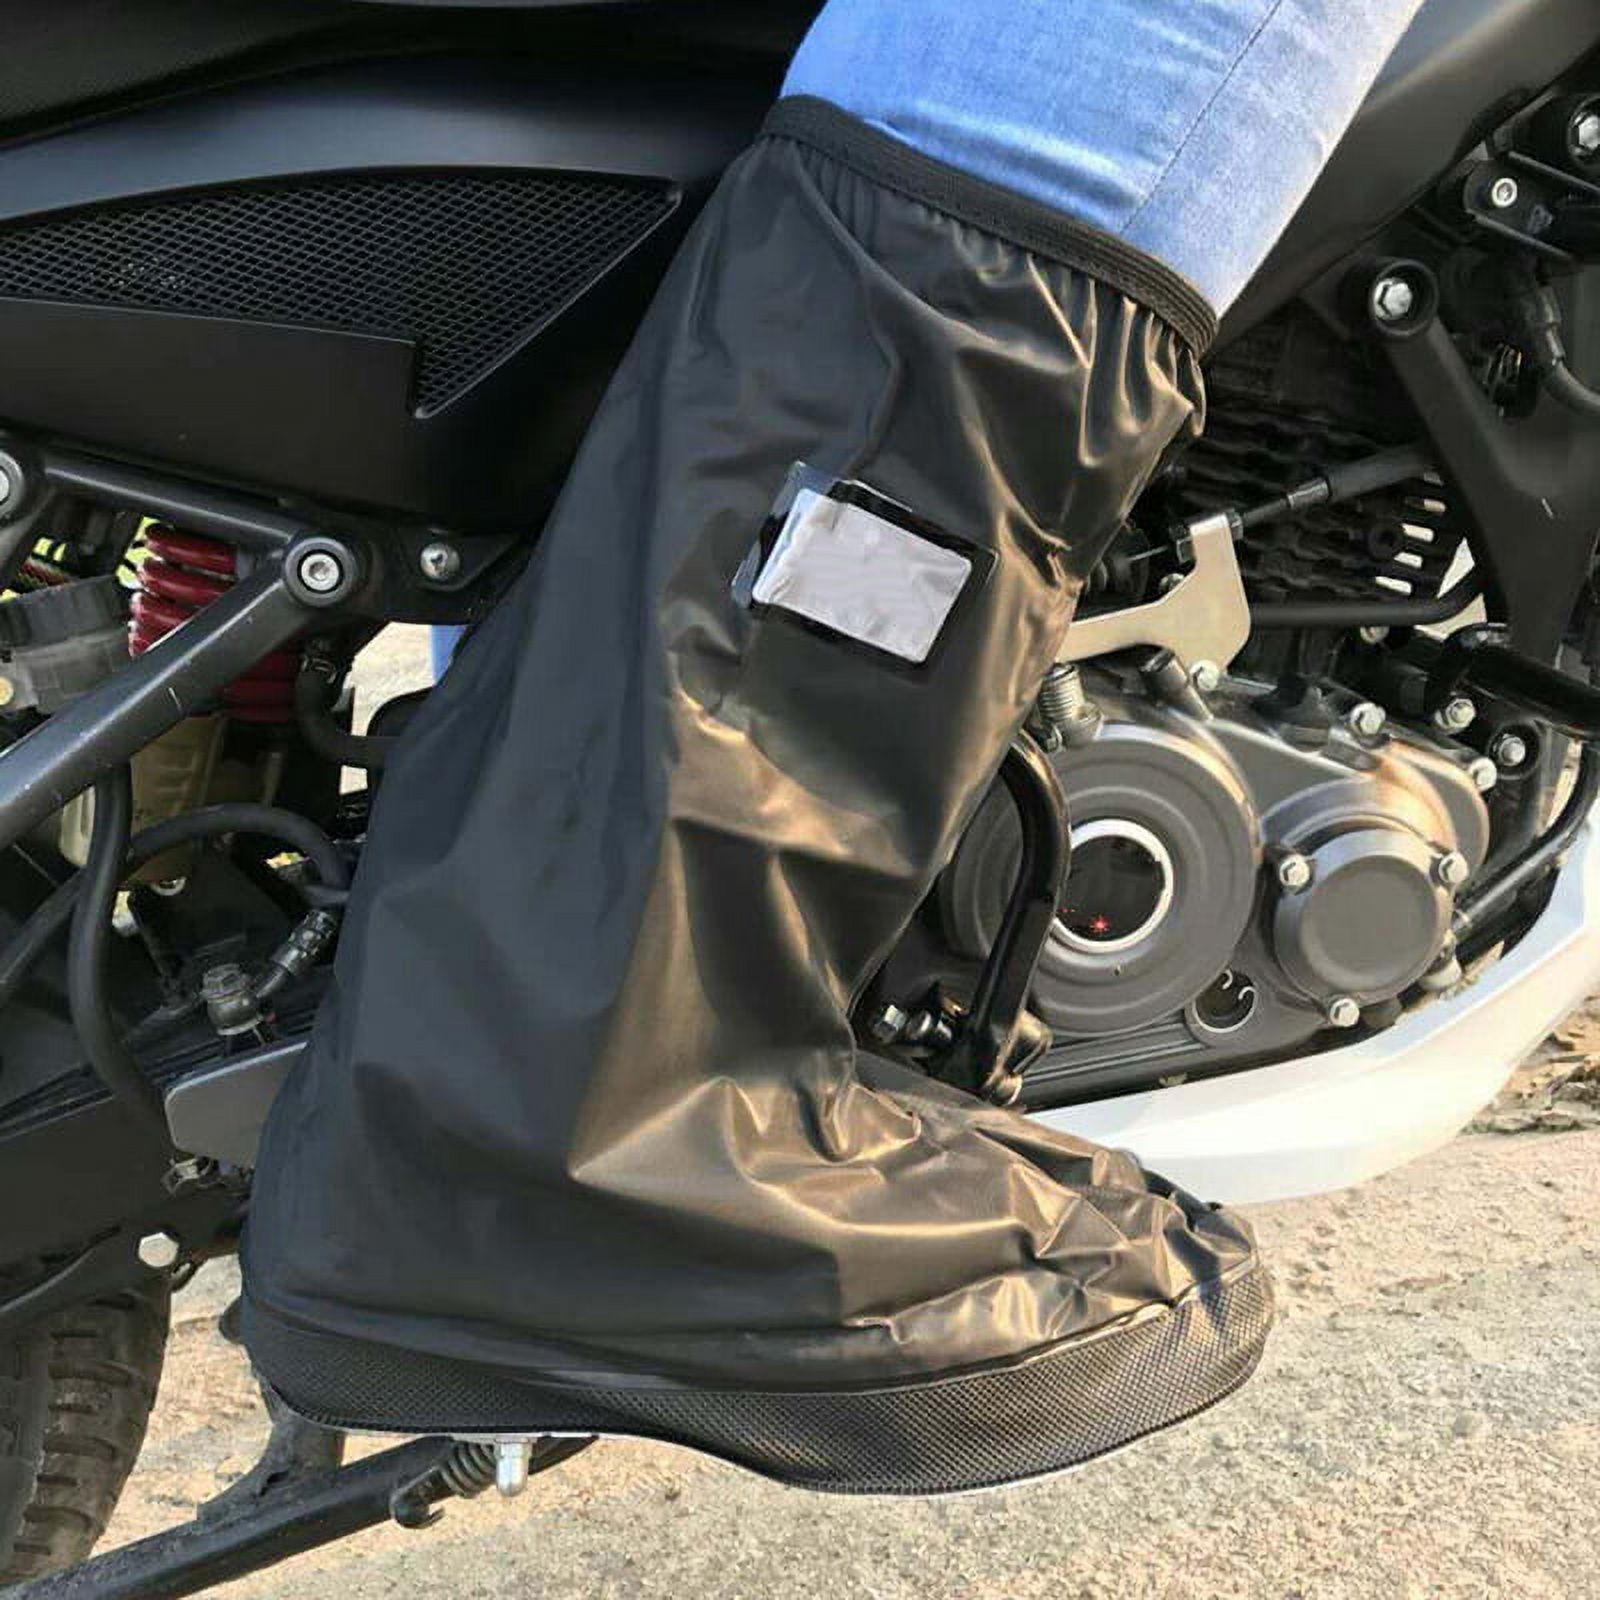 Reusable Rain Shoe Covers Waterproof Shoe Protectors Women Men Rubber Galoshes Motorcycle Cycling Elastic Boots Cover - image 1 of 1